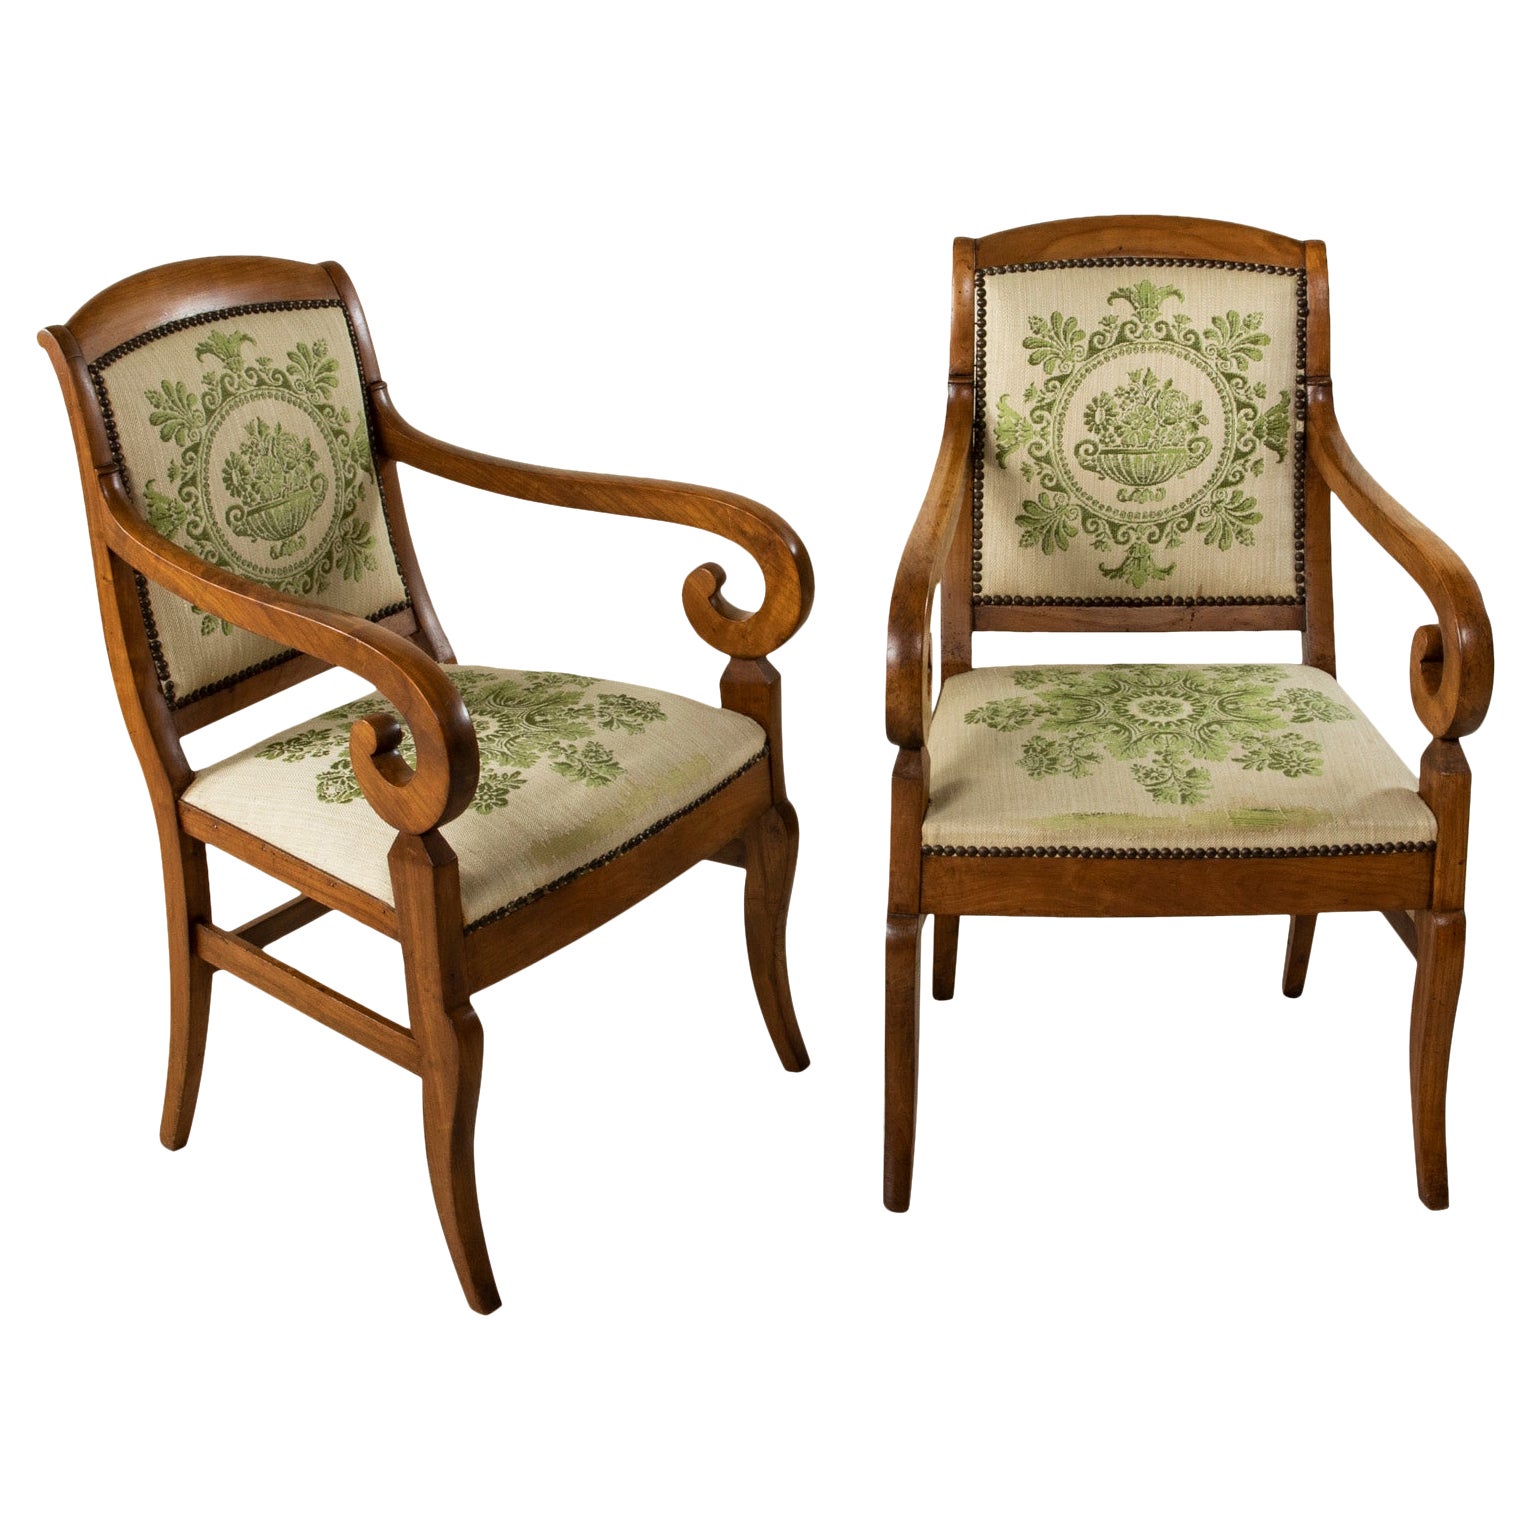 Early 19th Century French Restauration Period Elm Armchairs with Urn Motif For Sale